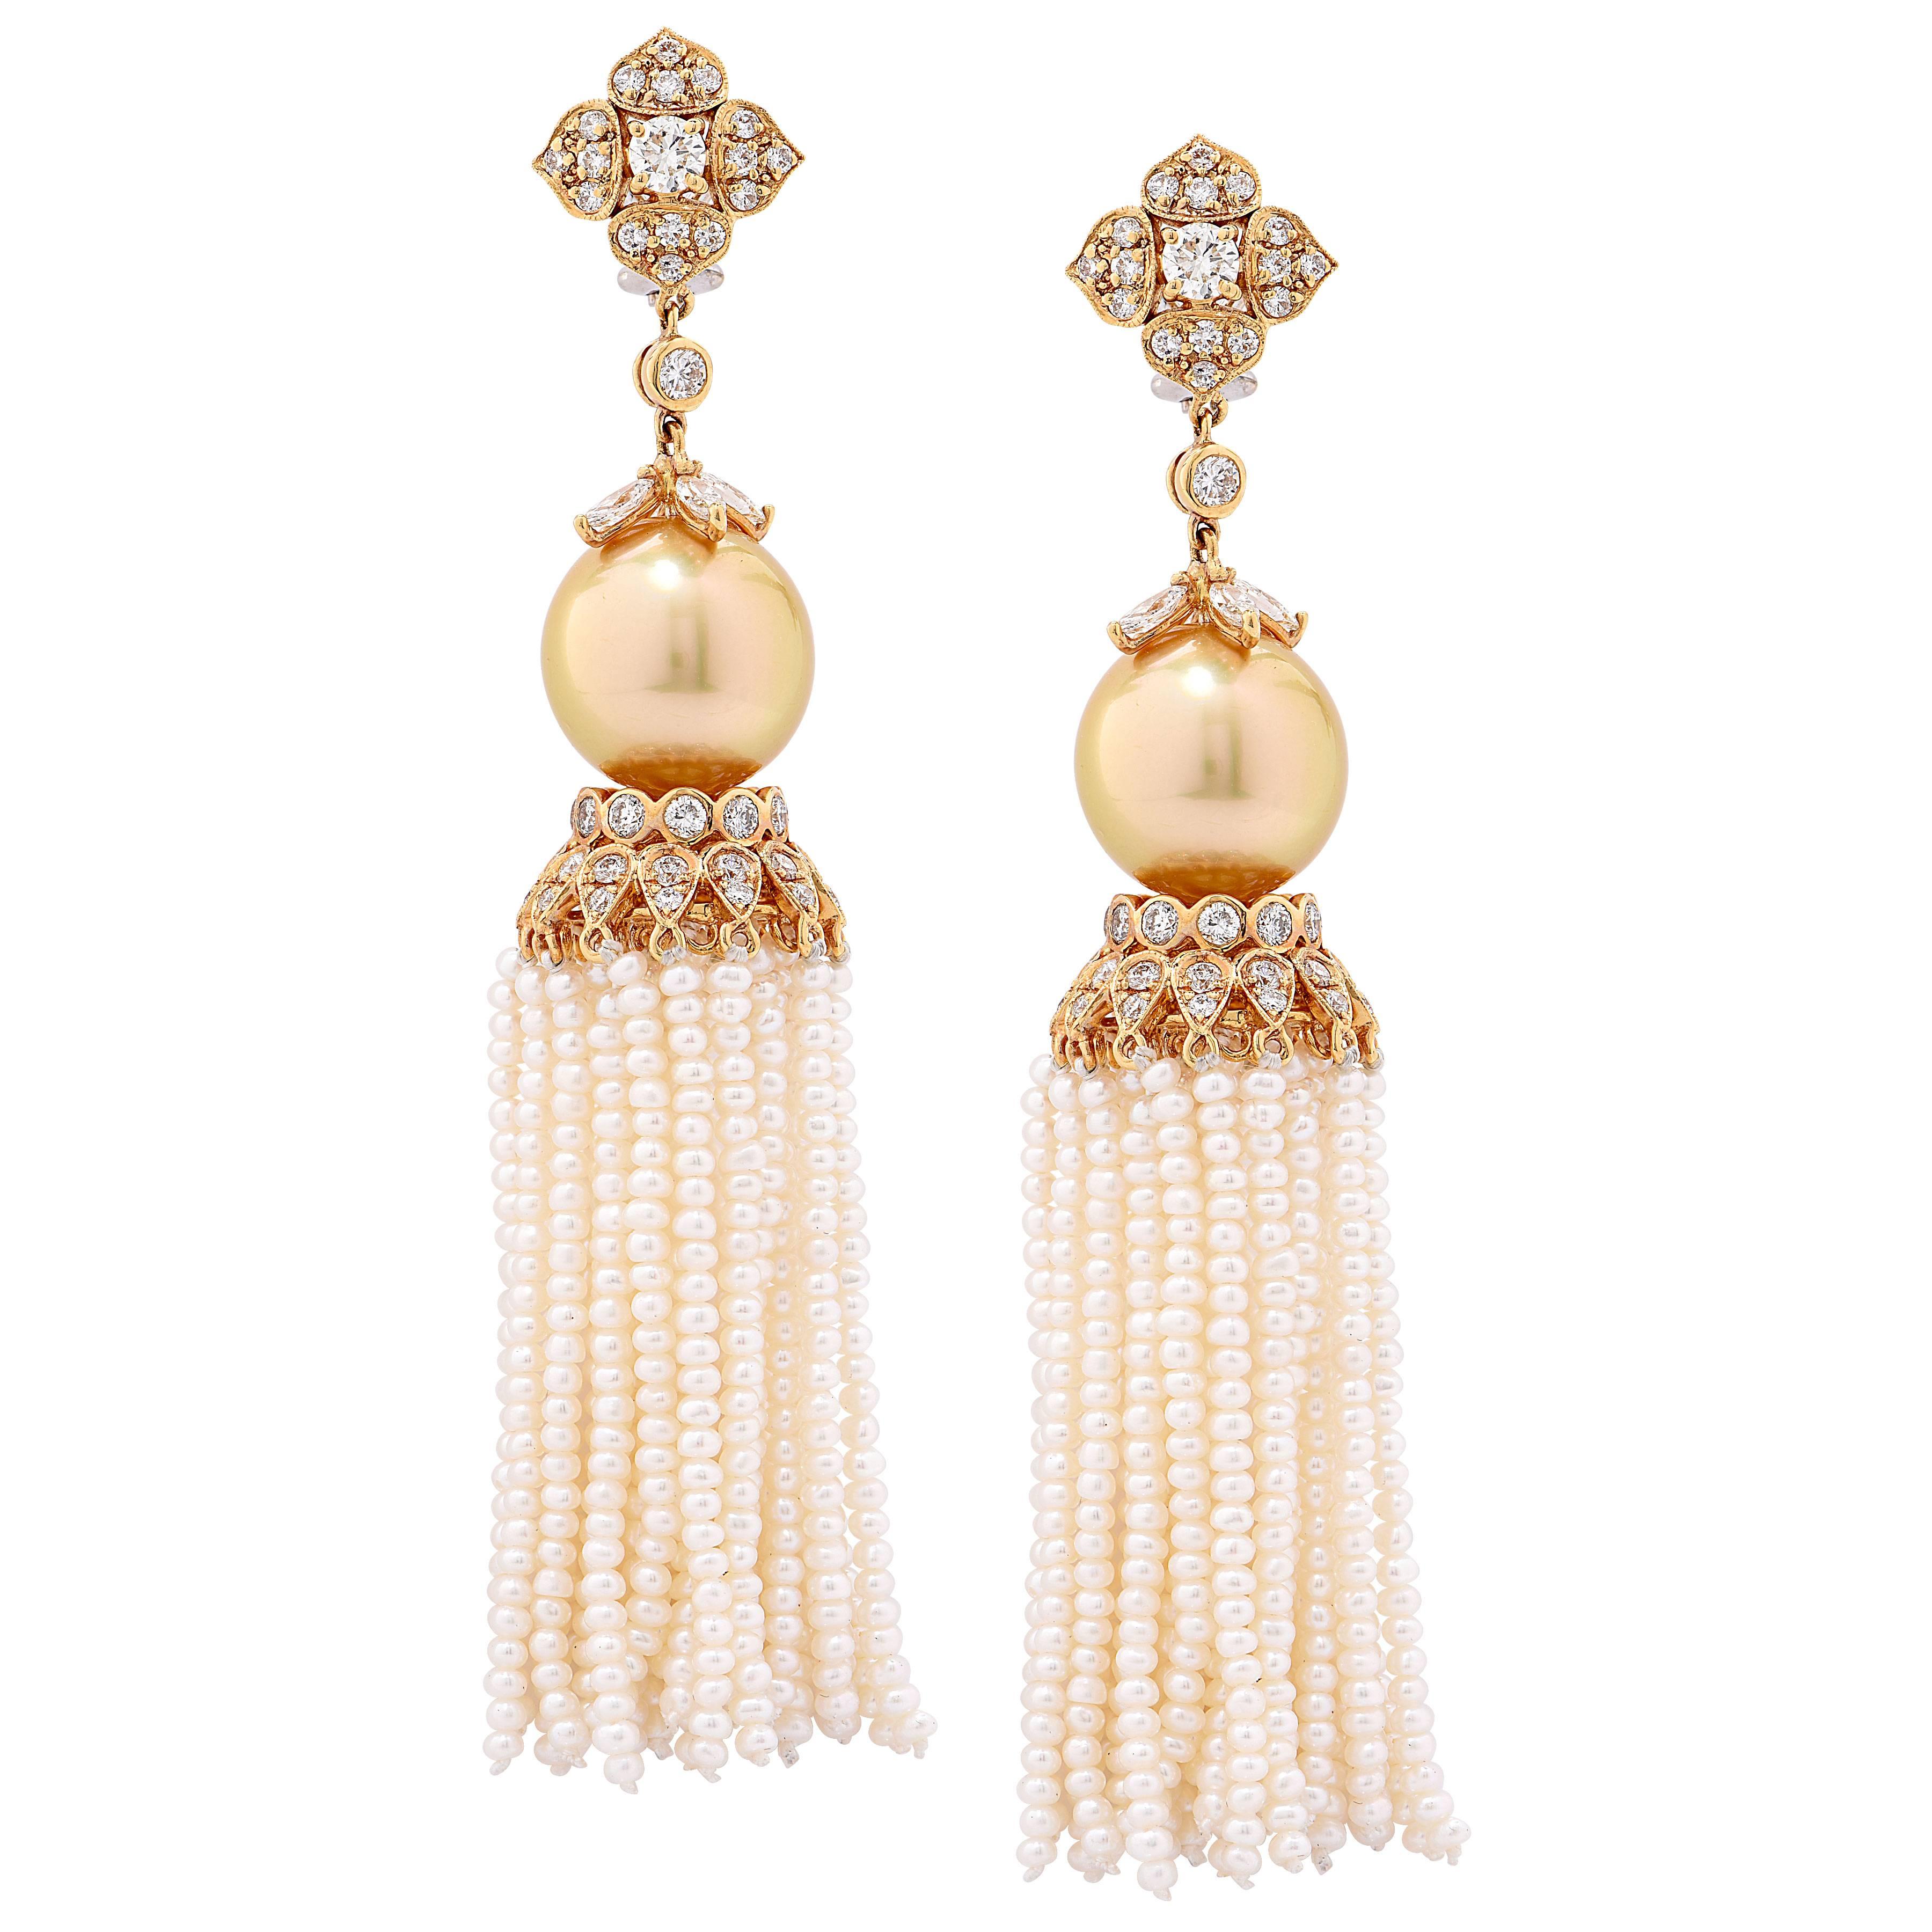 4.05 Carat Diamond and Golden South Sea Pearl Ear Clips with Removable Tassel In New Condition For Sale In Bay Harbor Islands, FL